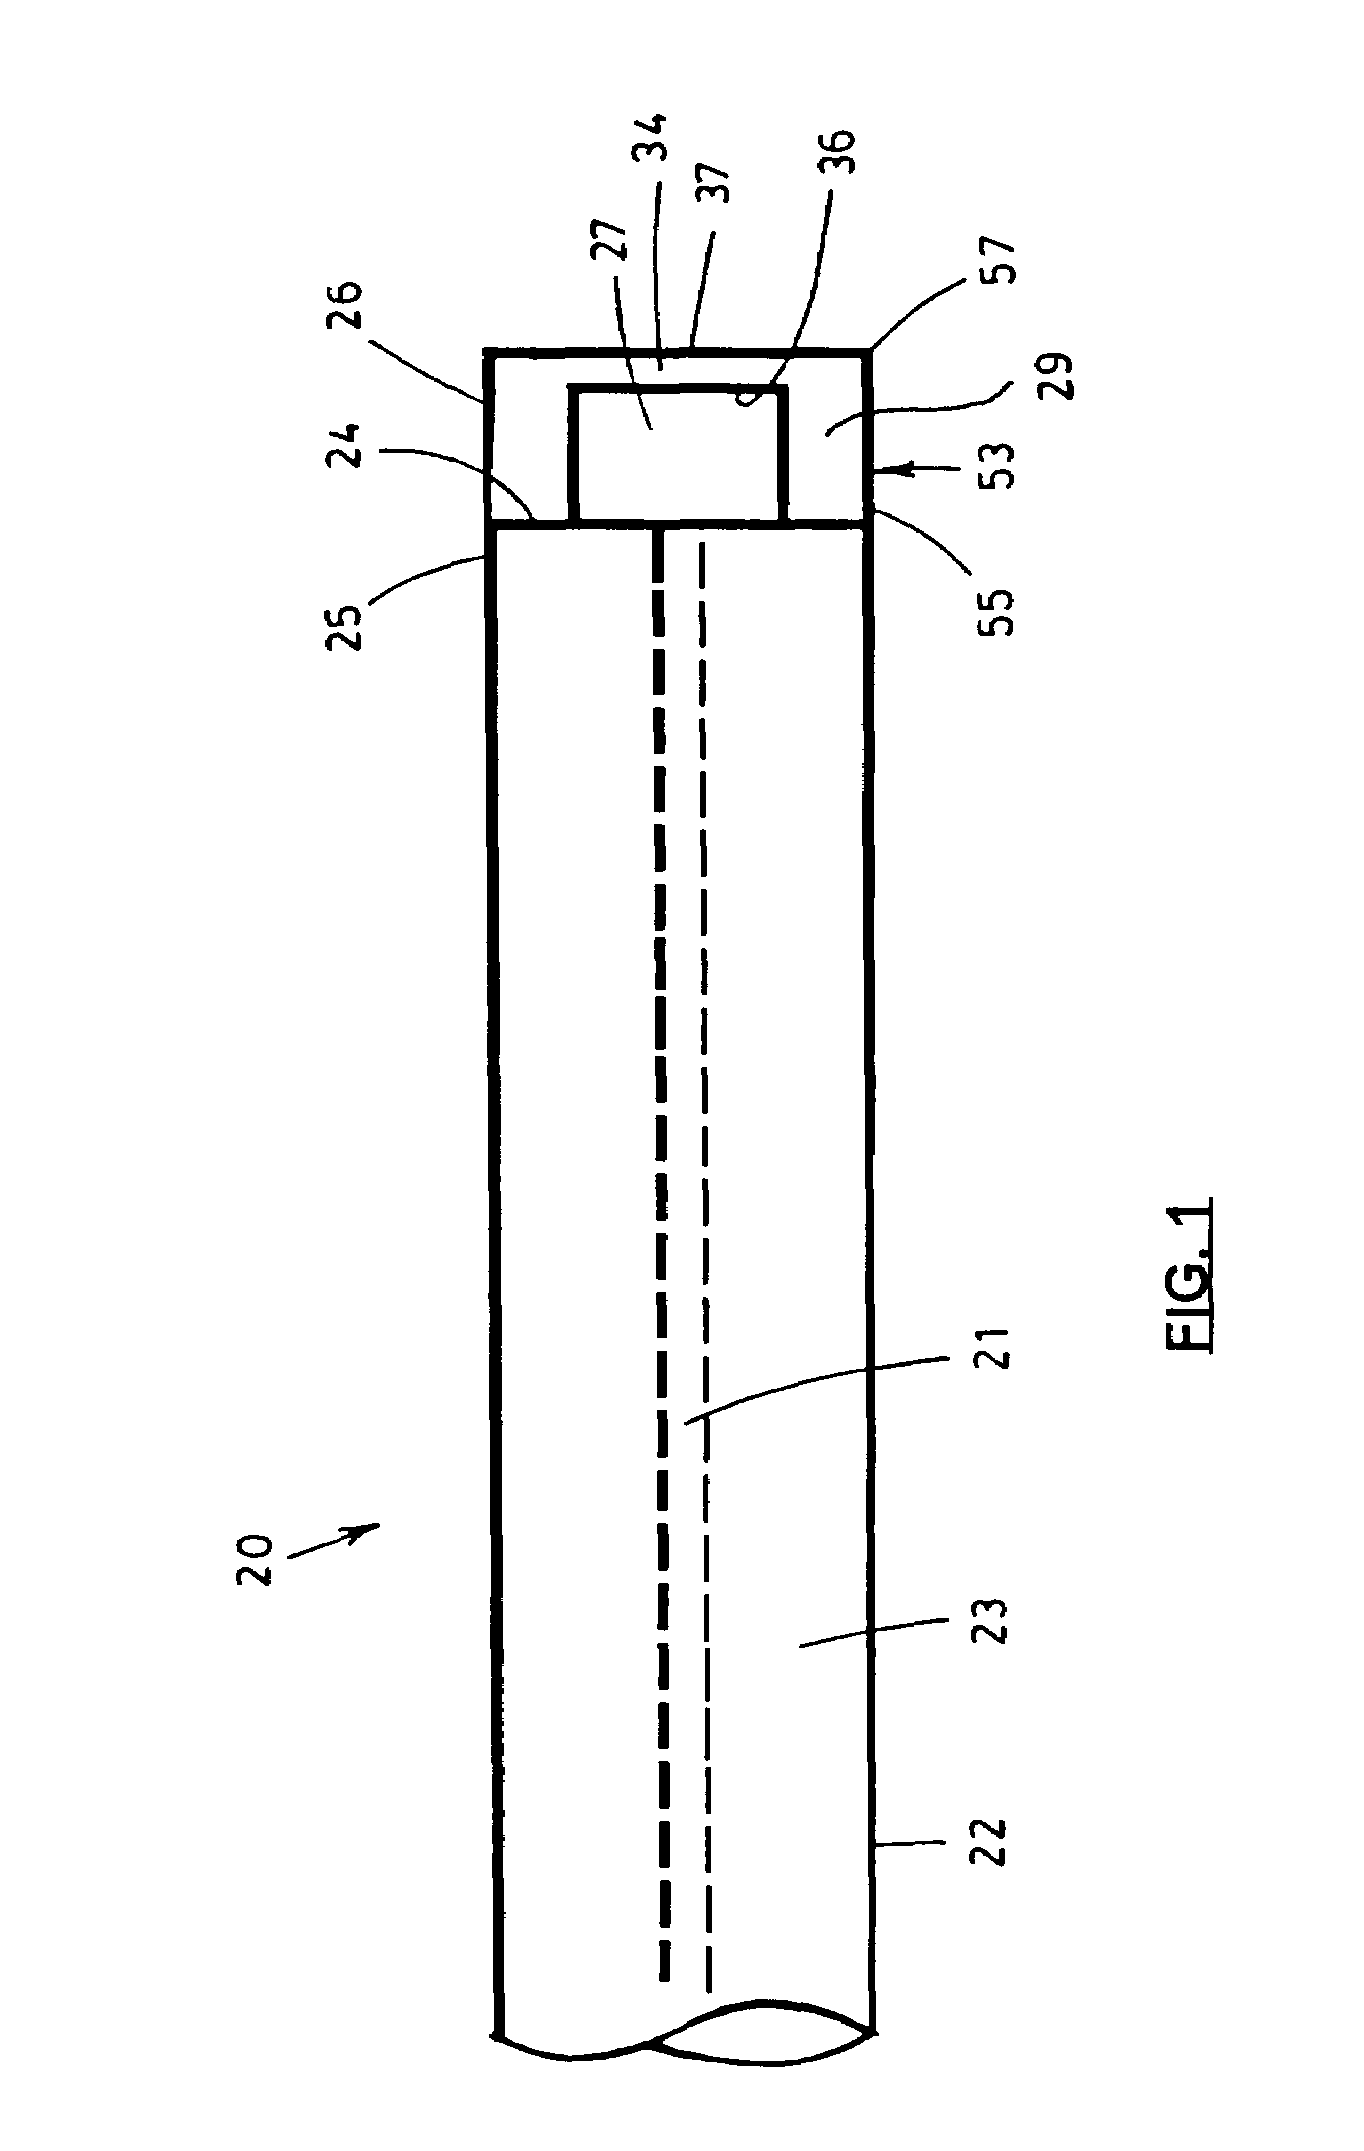 Single piece Fabry-Perot optical sensor and method of manufacturing the same